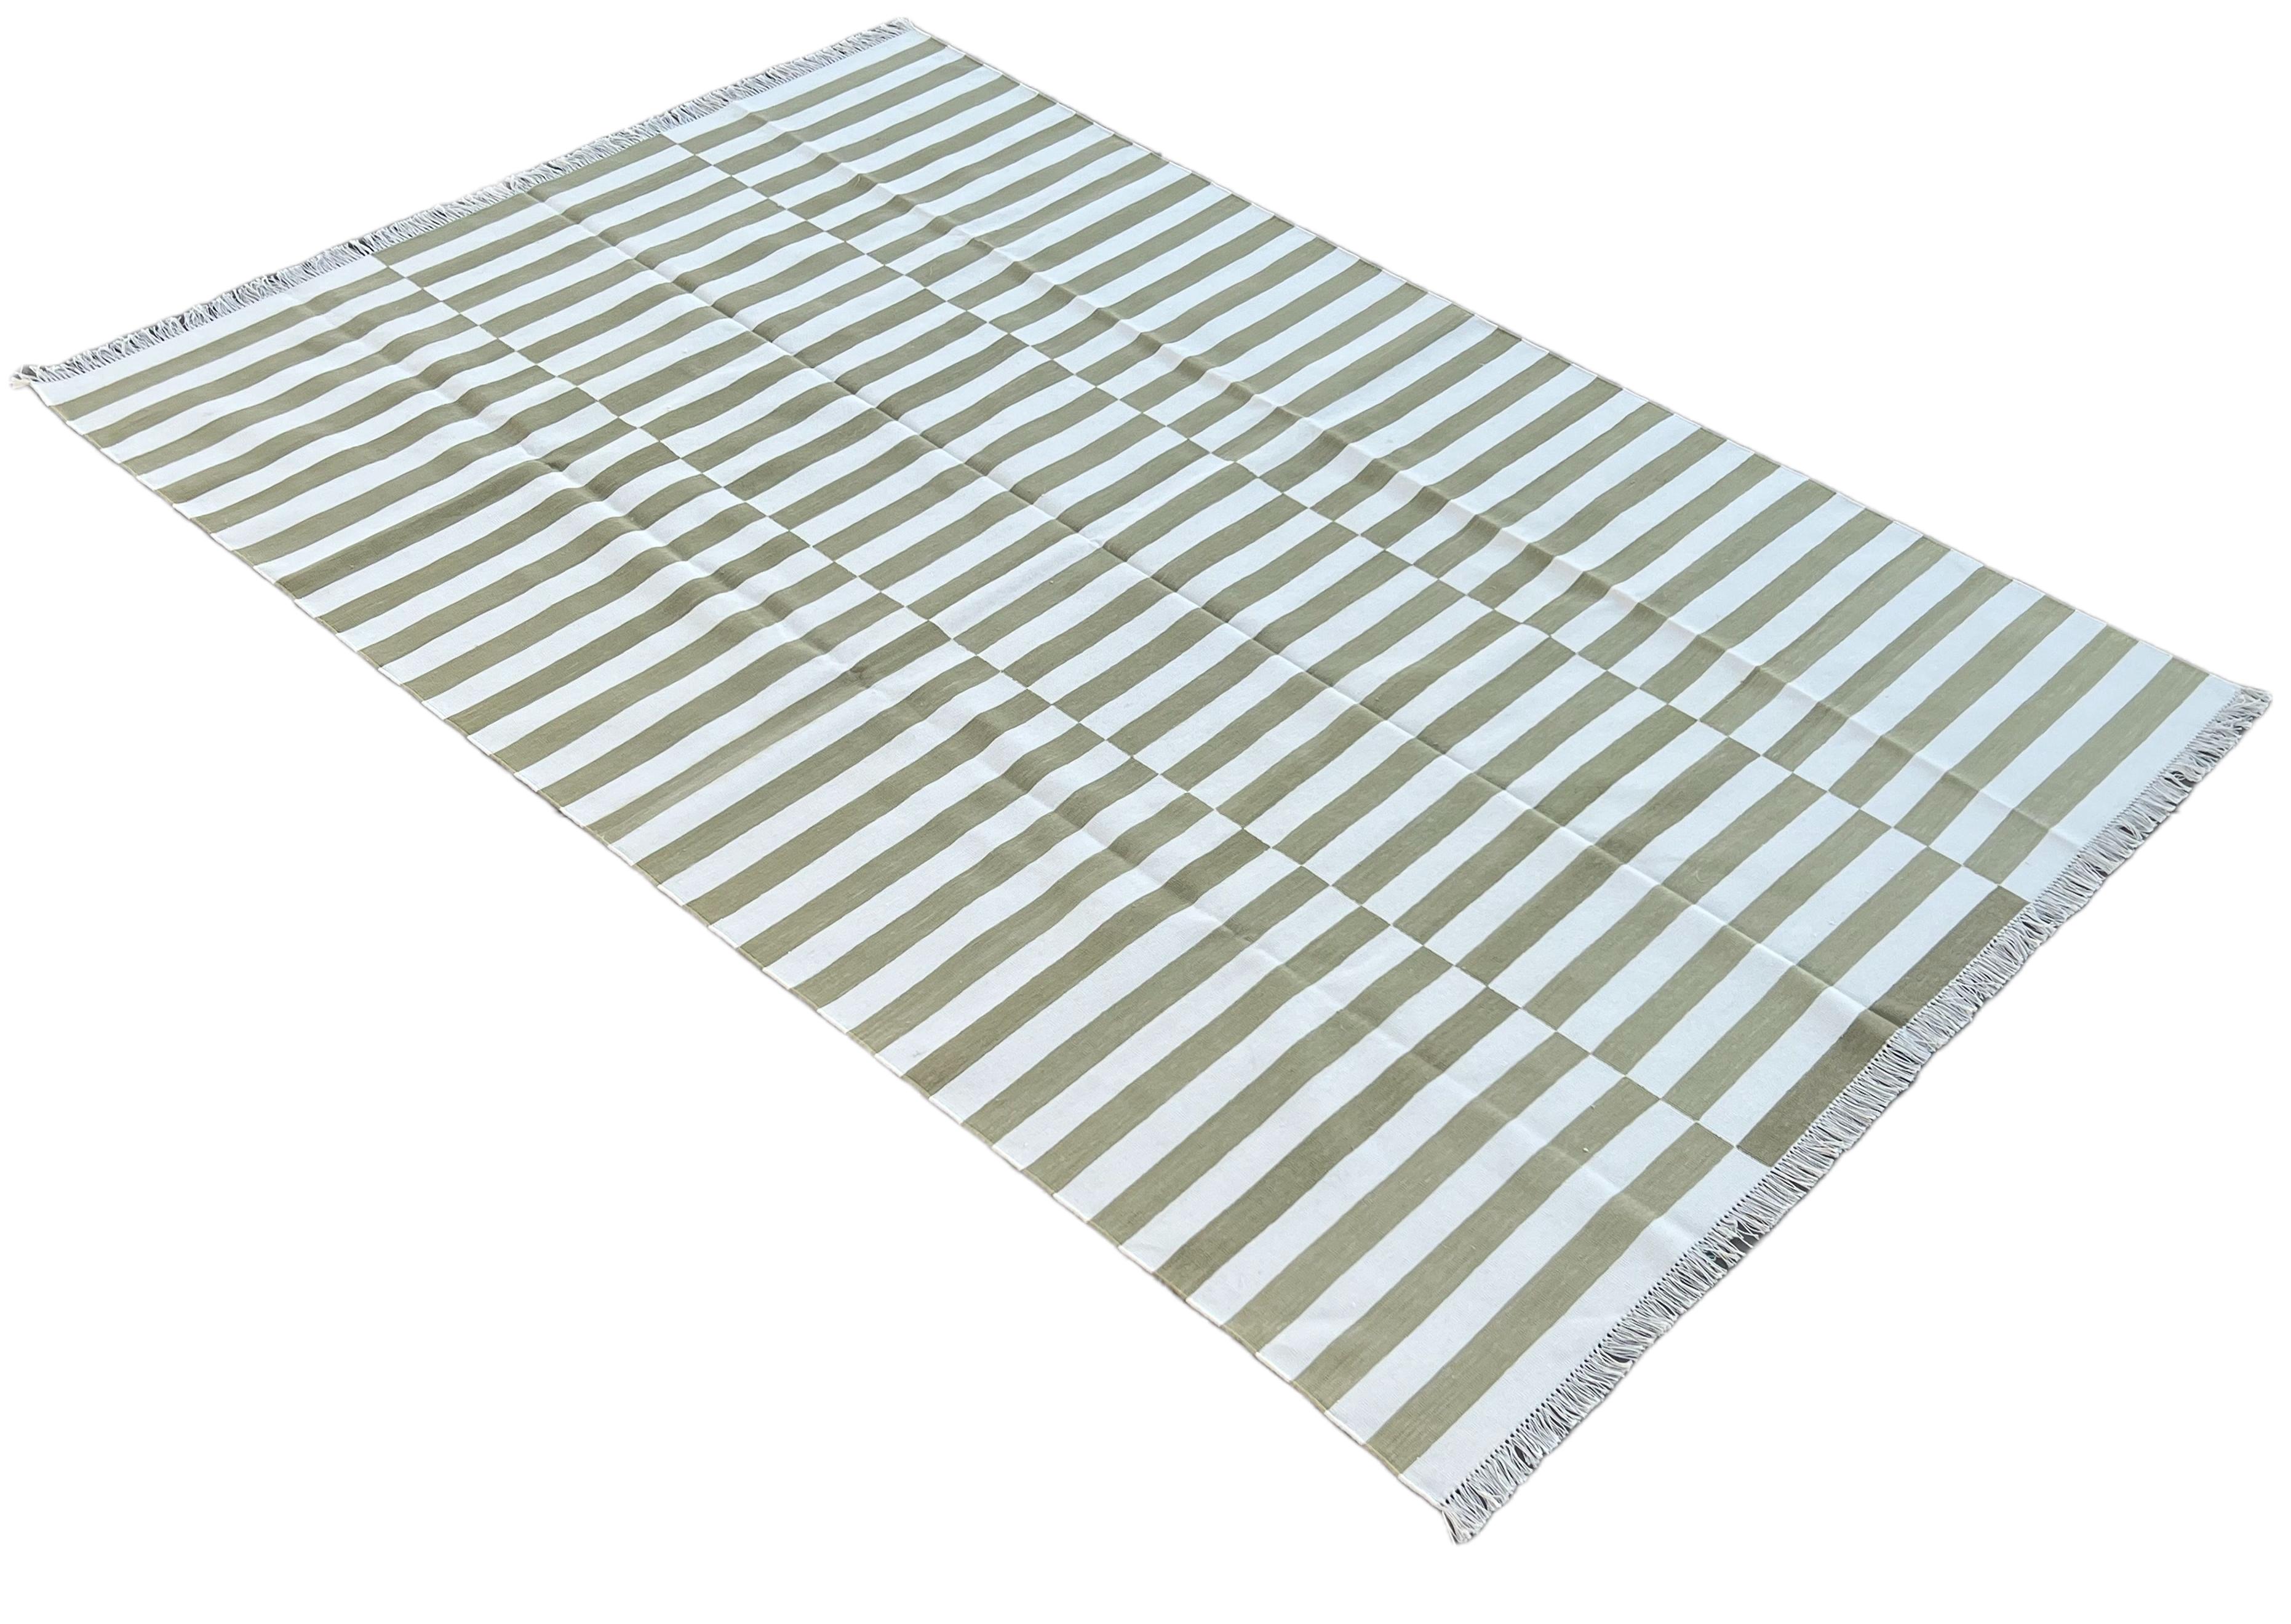 Cotton Natural Vegetable Dyed Olive Green And White Up Down Striped Indian Rug-6'x9'
These special flat-weave dhurries are hand-woven with 15 ply 100% cotton yarn. Due to the special manufacturing techniques used to create our rugs, the size and